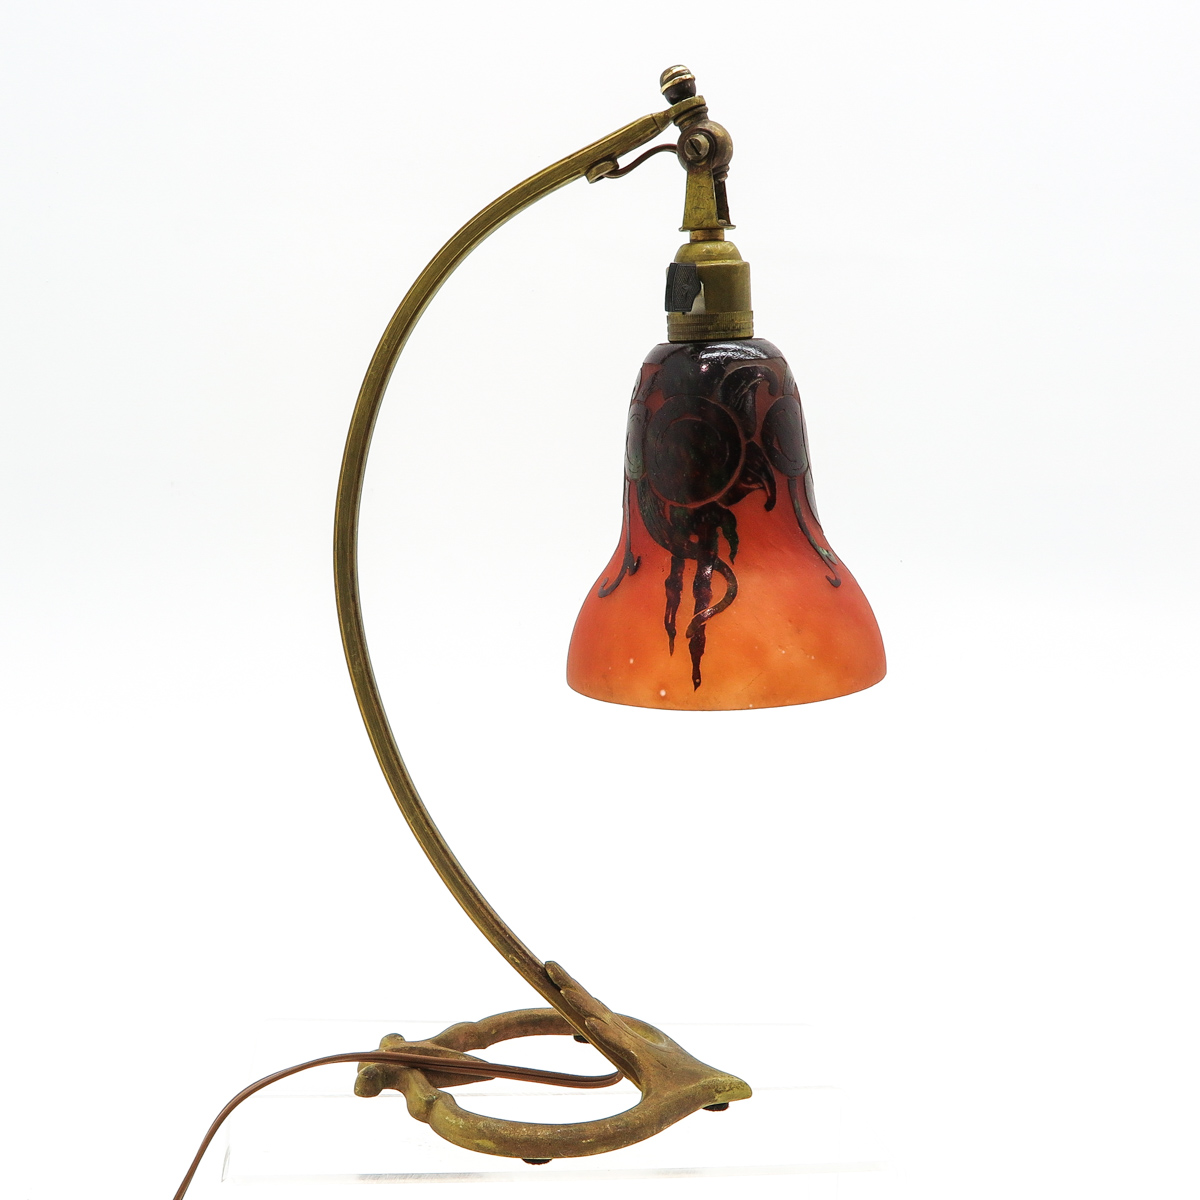 Signed Le Verre Francais Table lamp - Image 4 of 6